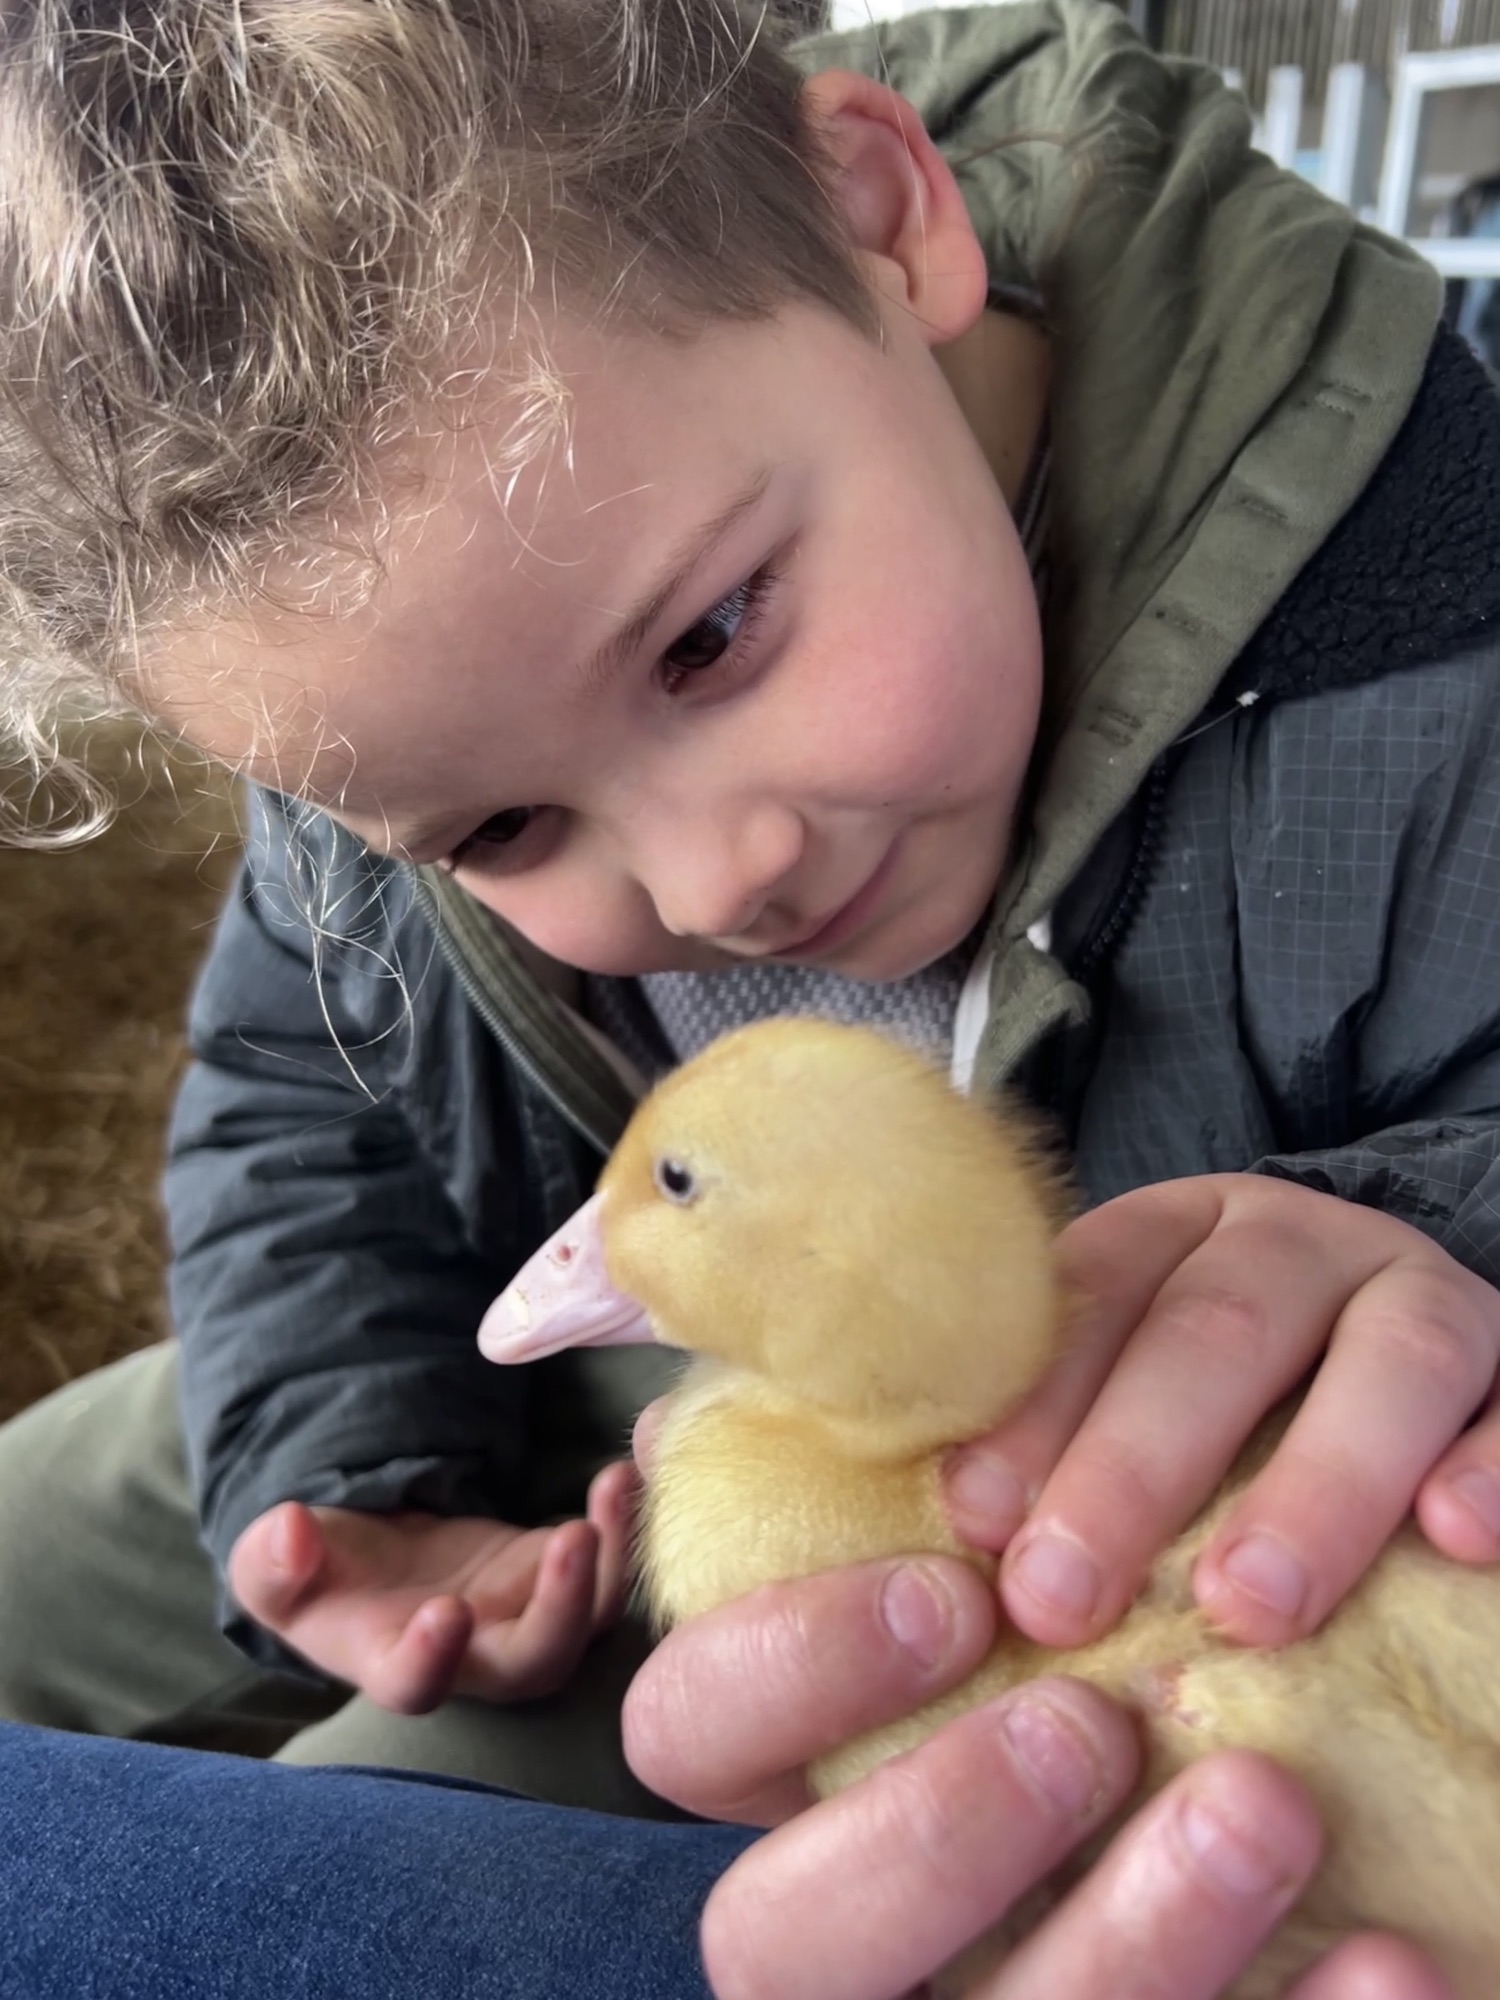 A child gently holding a small duckling.